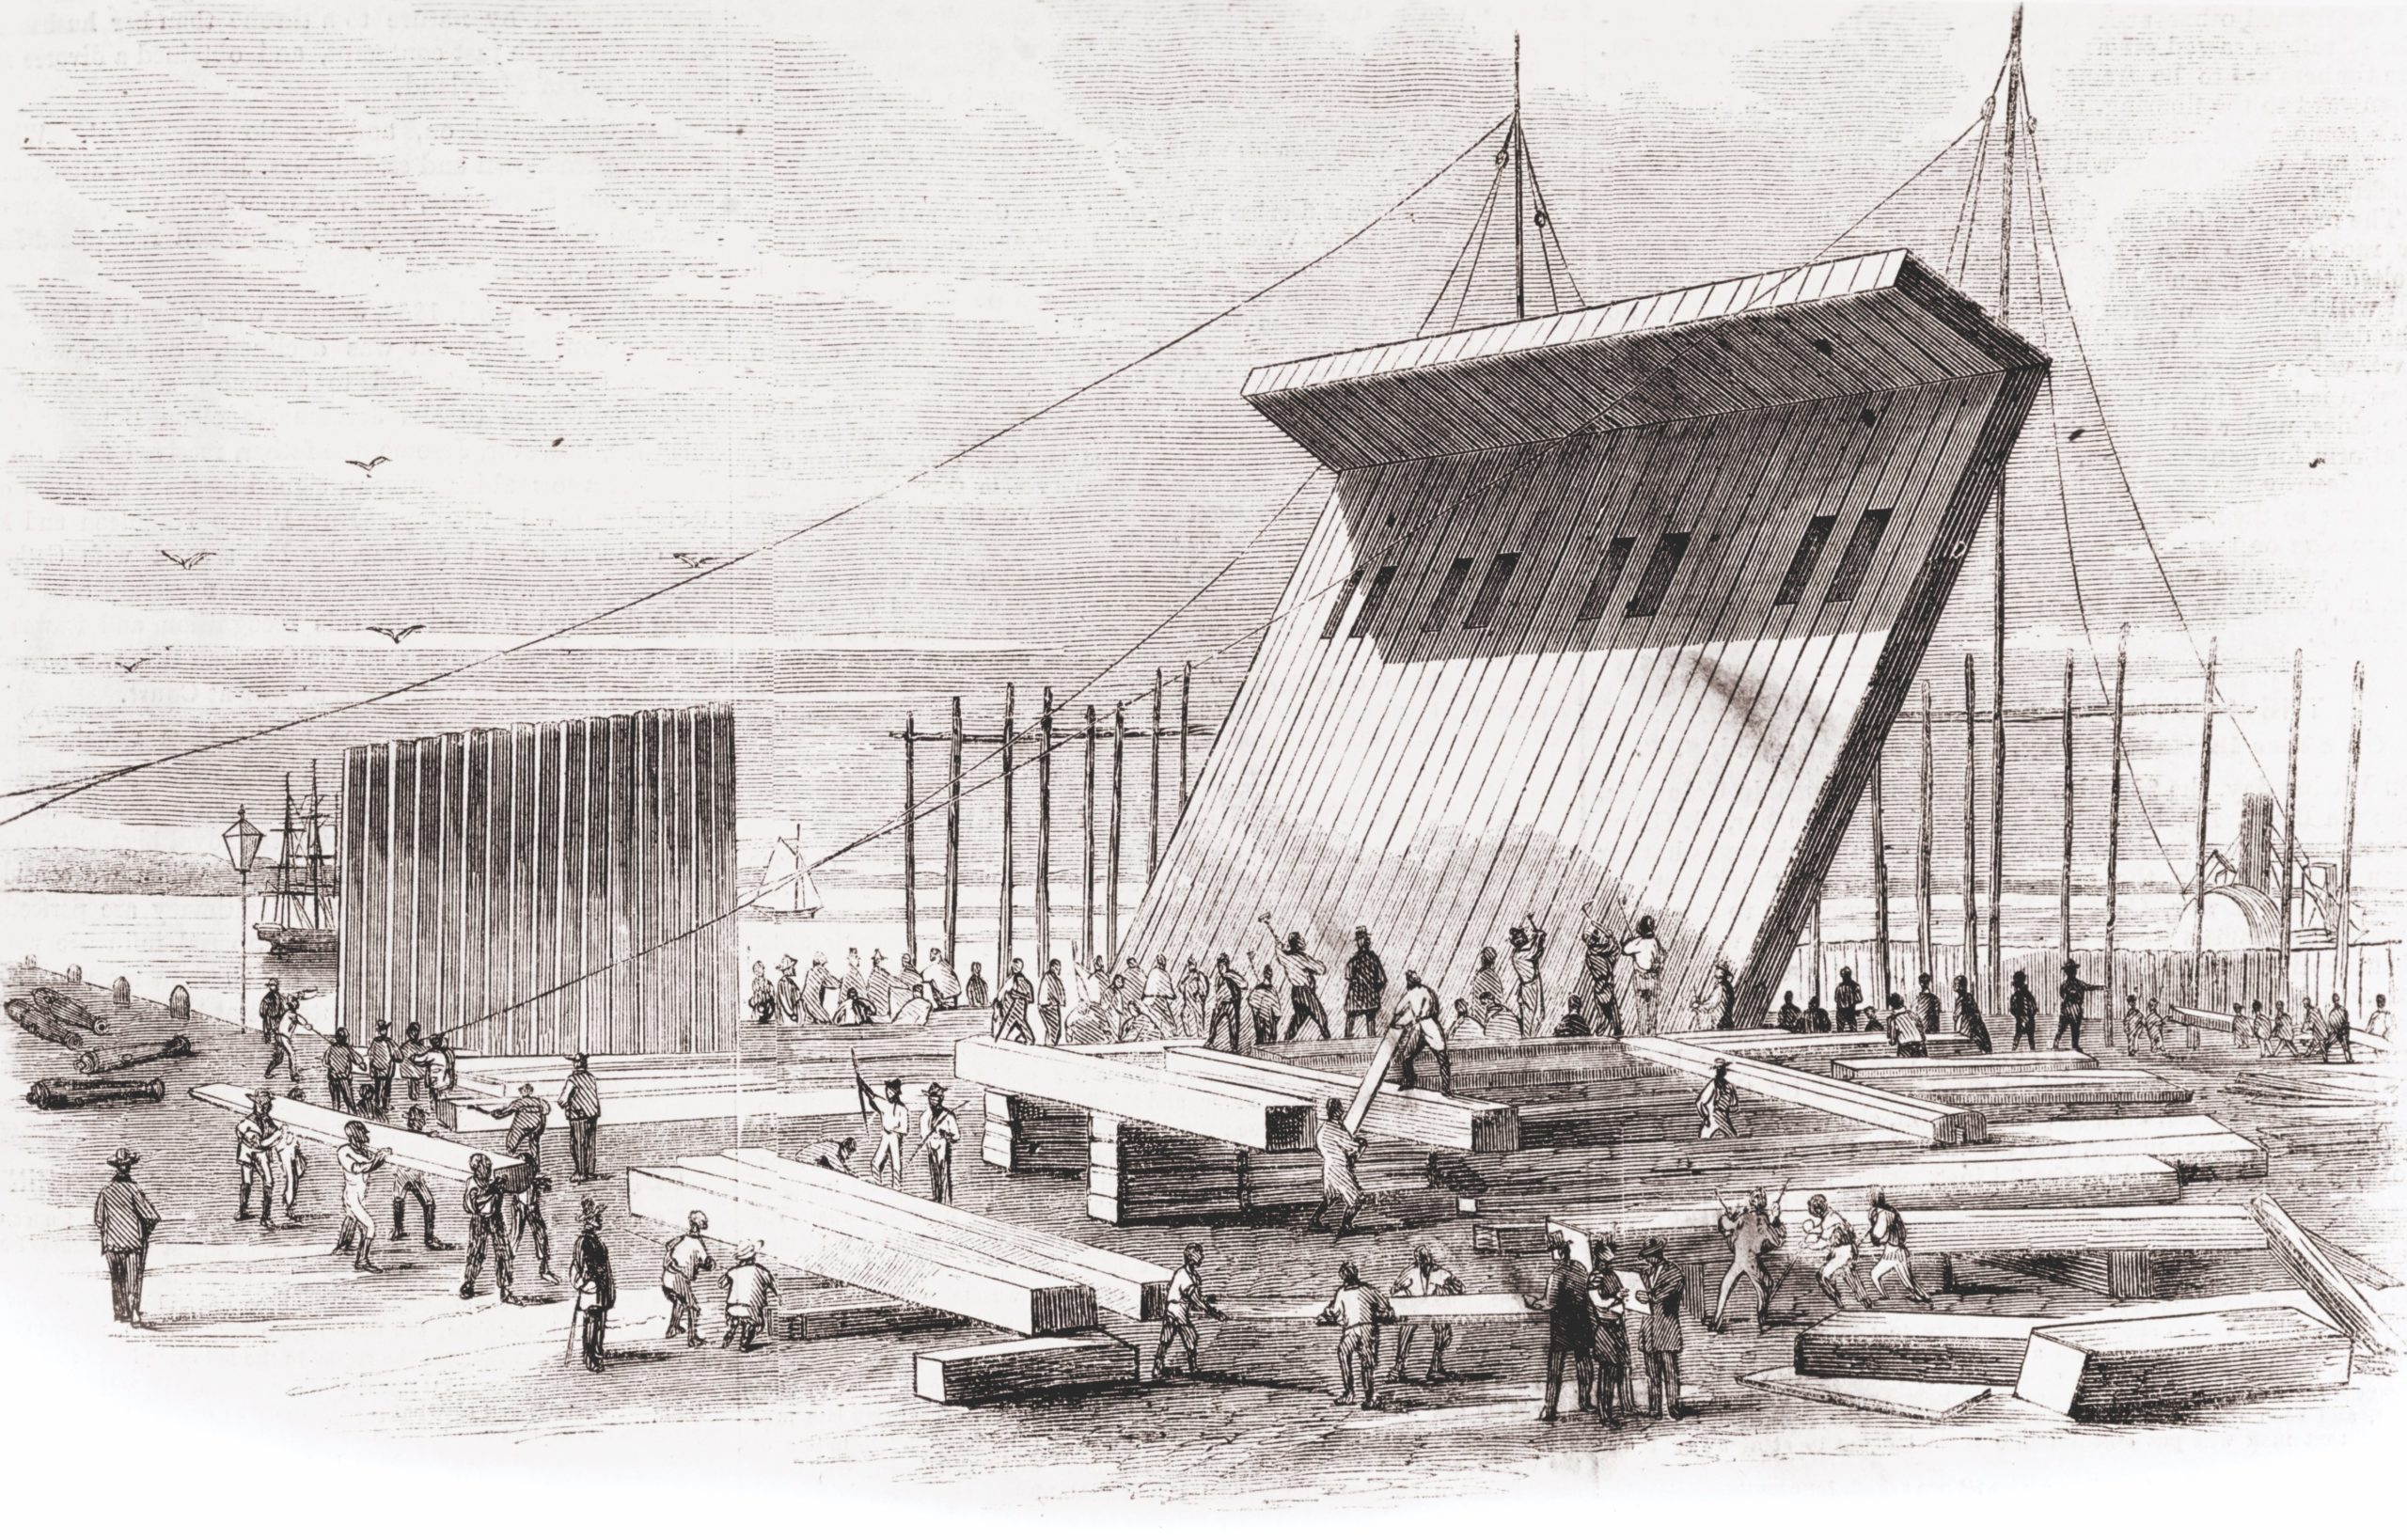 The substantial reliance on slave labor in the construction of the Floating Battery, commented on by Fort Sumter’s Major Robert Anderson, is seen in this Frank Leslie’s Illustrated Newspaper drawing. The group effort at Marsh’s Shipyard proved productive. Construction was completed in a few weeks. (Naval History and Heritage Command)